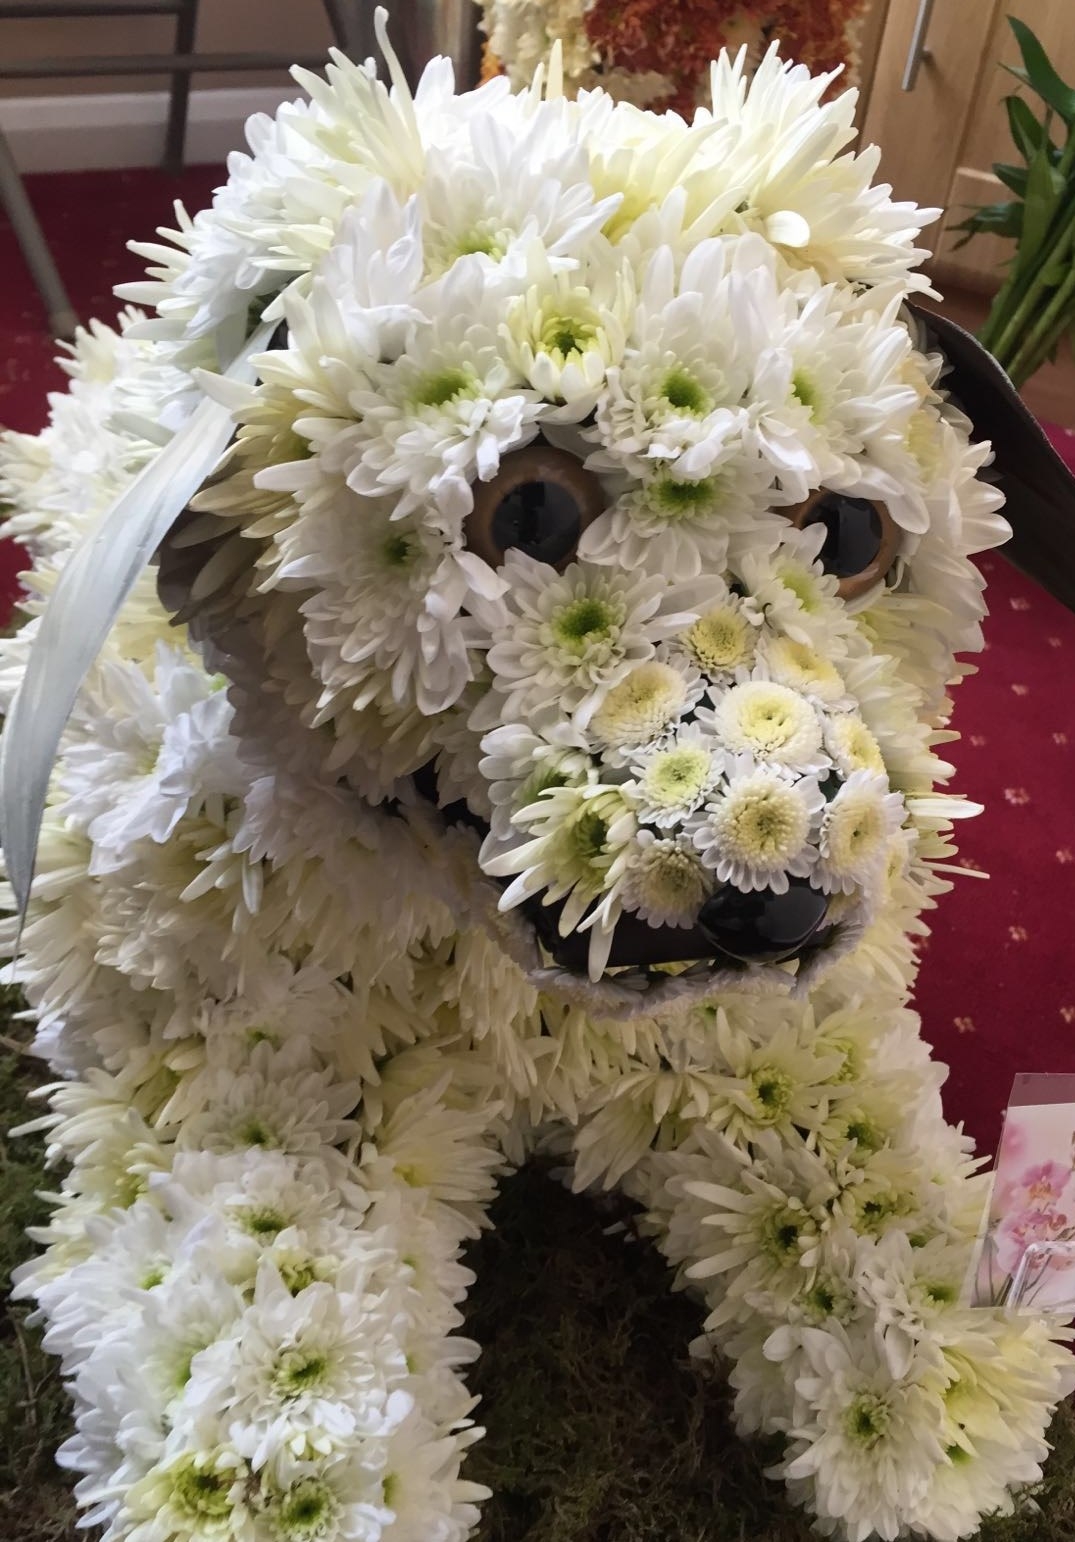 Labrador made from flowers